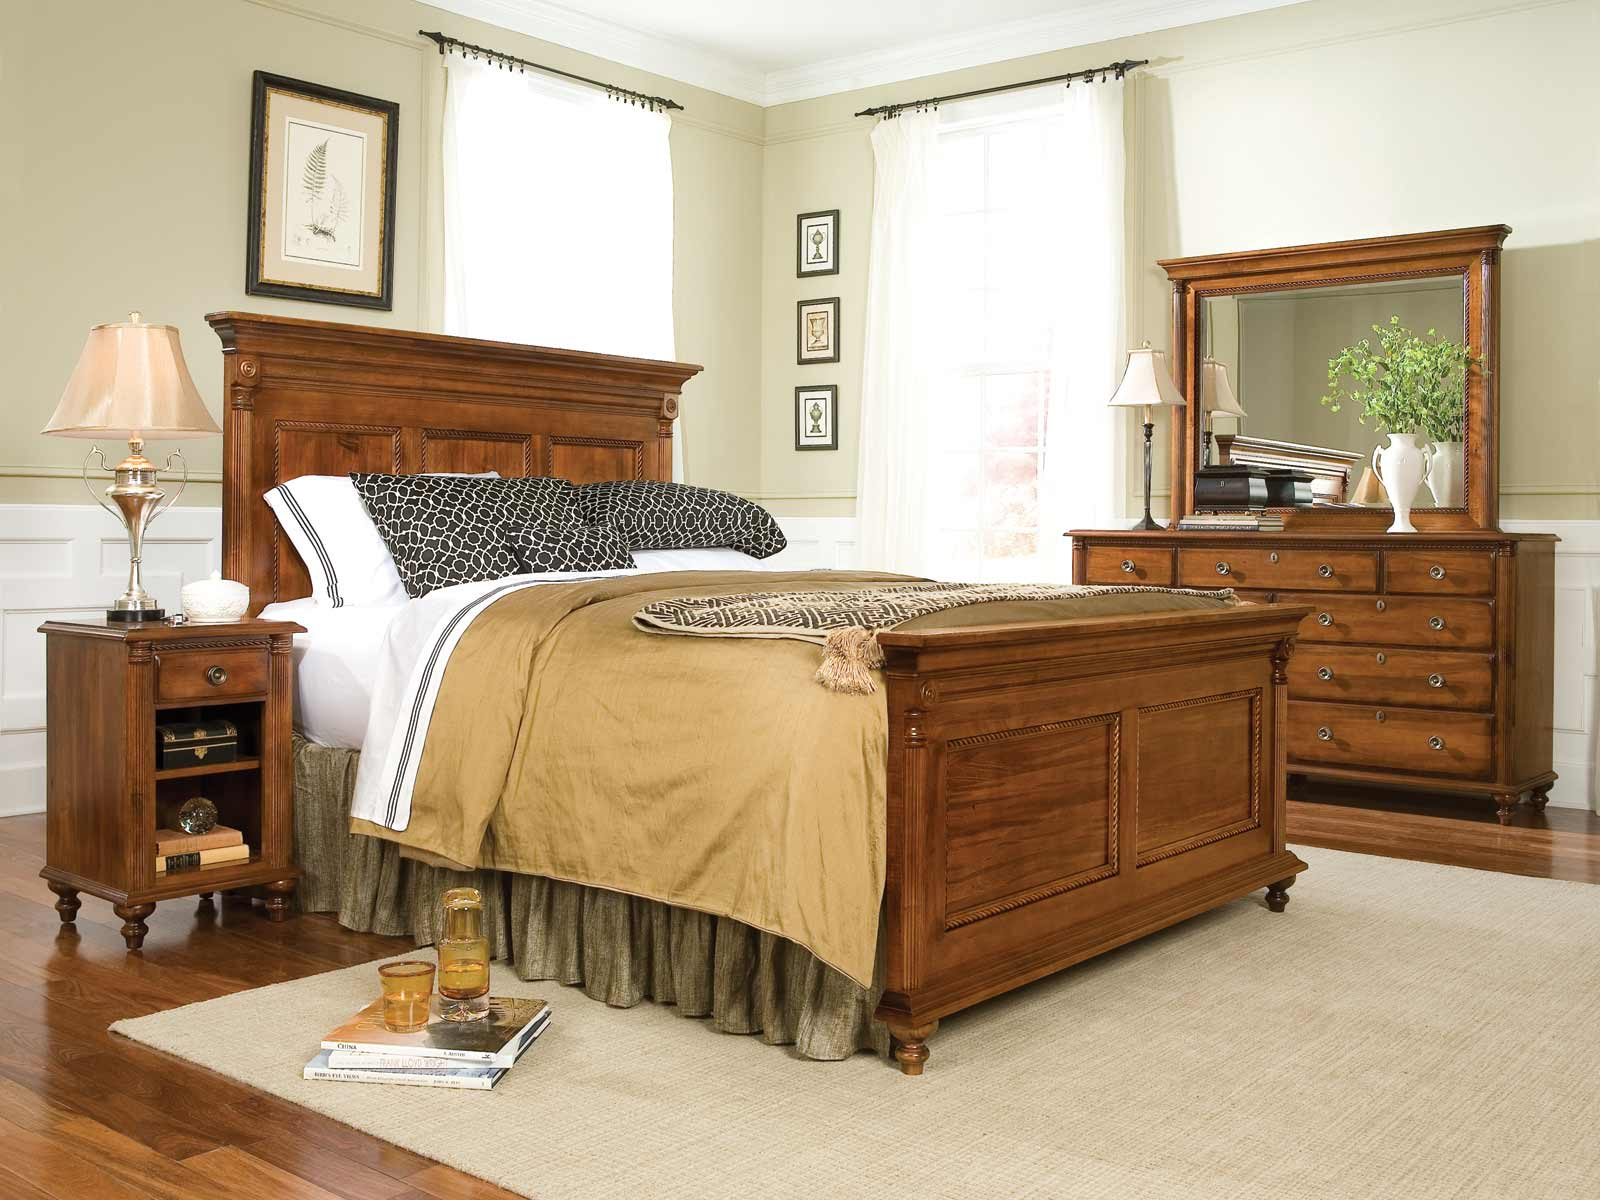 Durham Furniture Savile Row Panel Bedroom Set In Park Lane throughout proportions 1600 X 1200